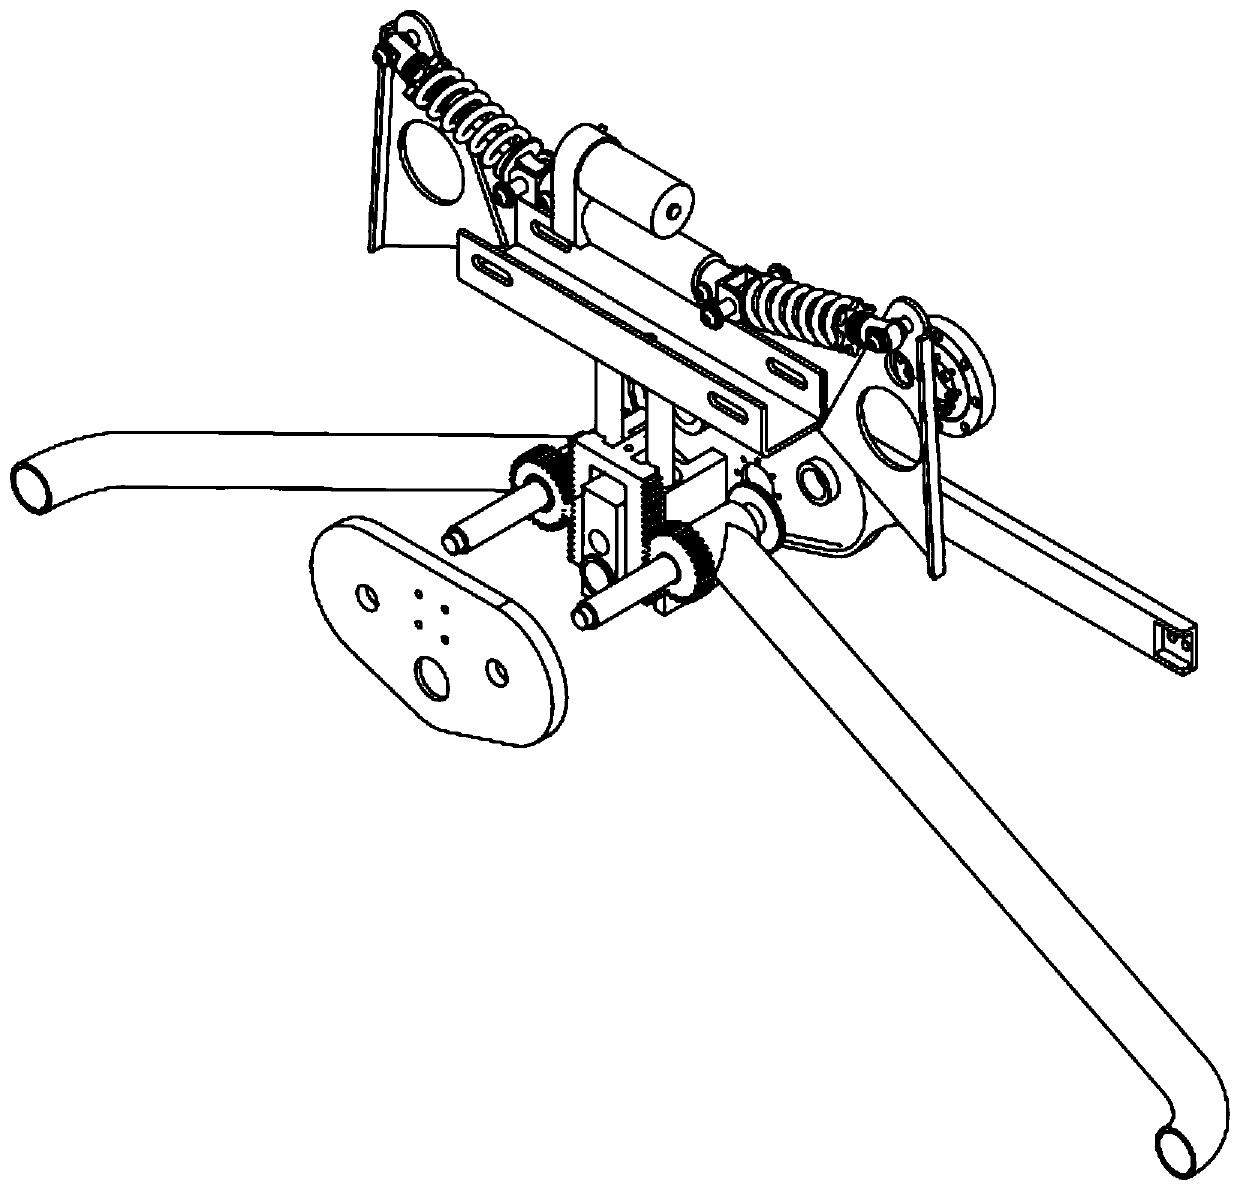 A rocker-type suspension mechanism that is fixedly connected to a traveling box through three points